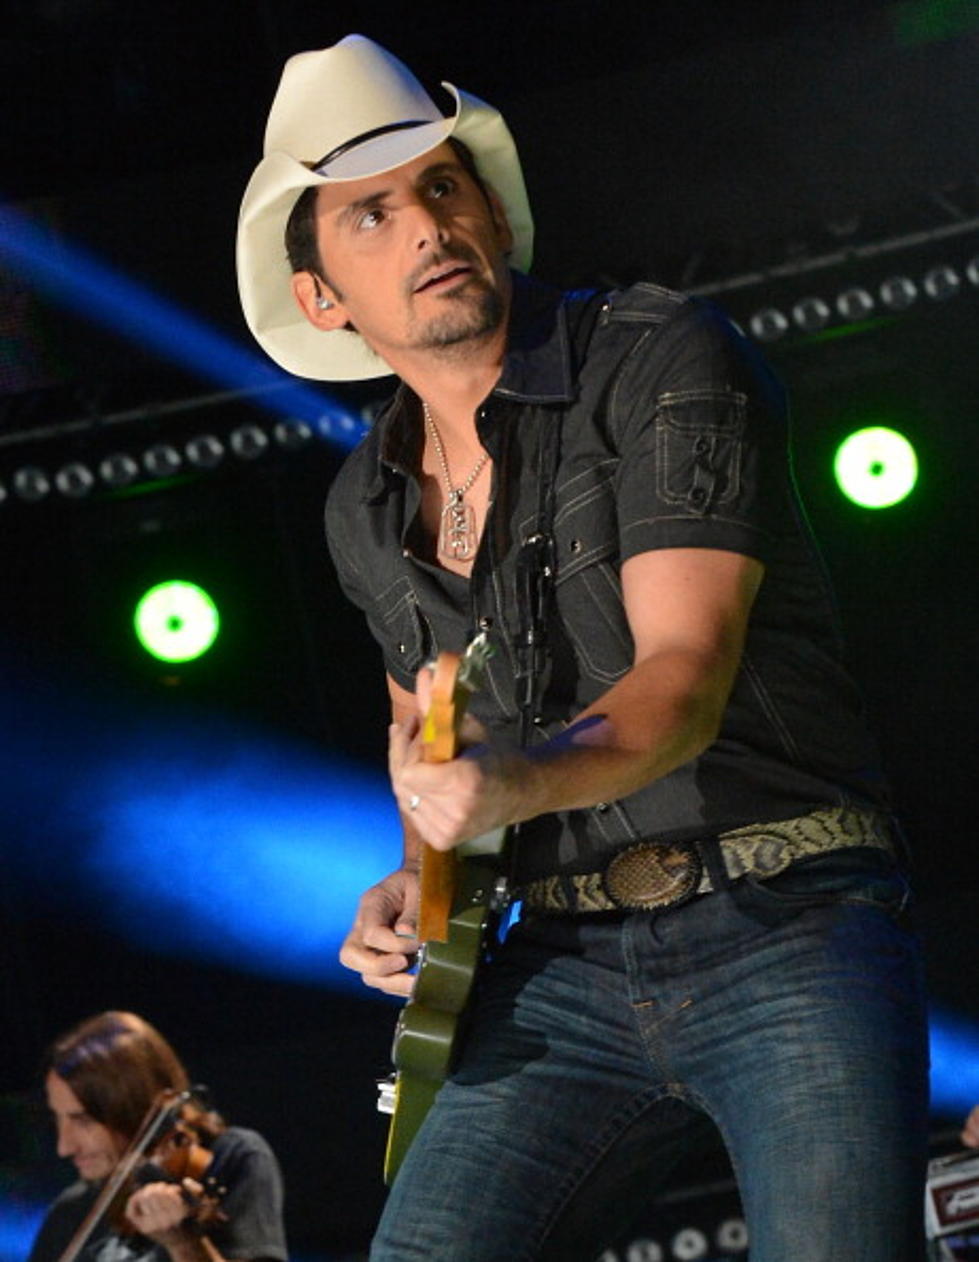 Brad Paisley Grabs a GoPro and Plays Guitar Solo with it [Video]